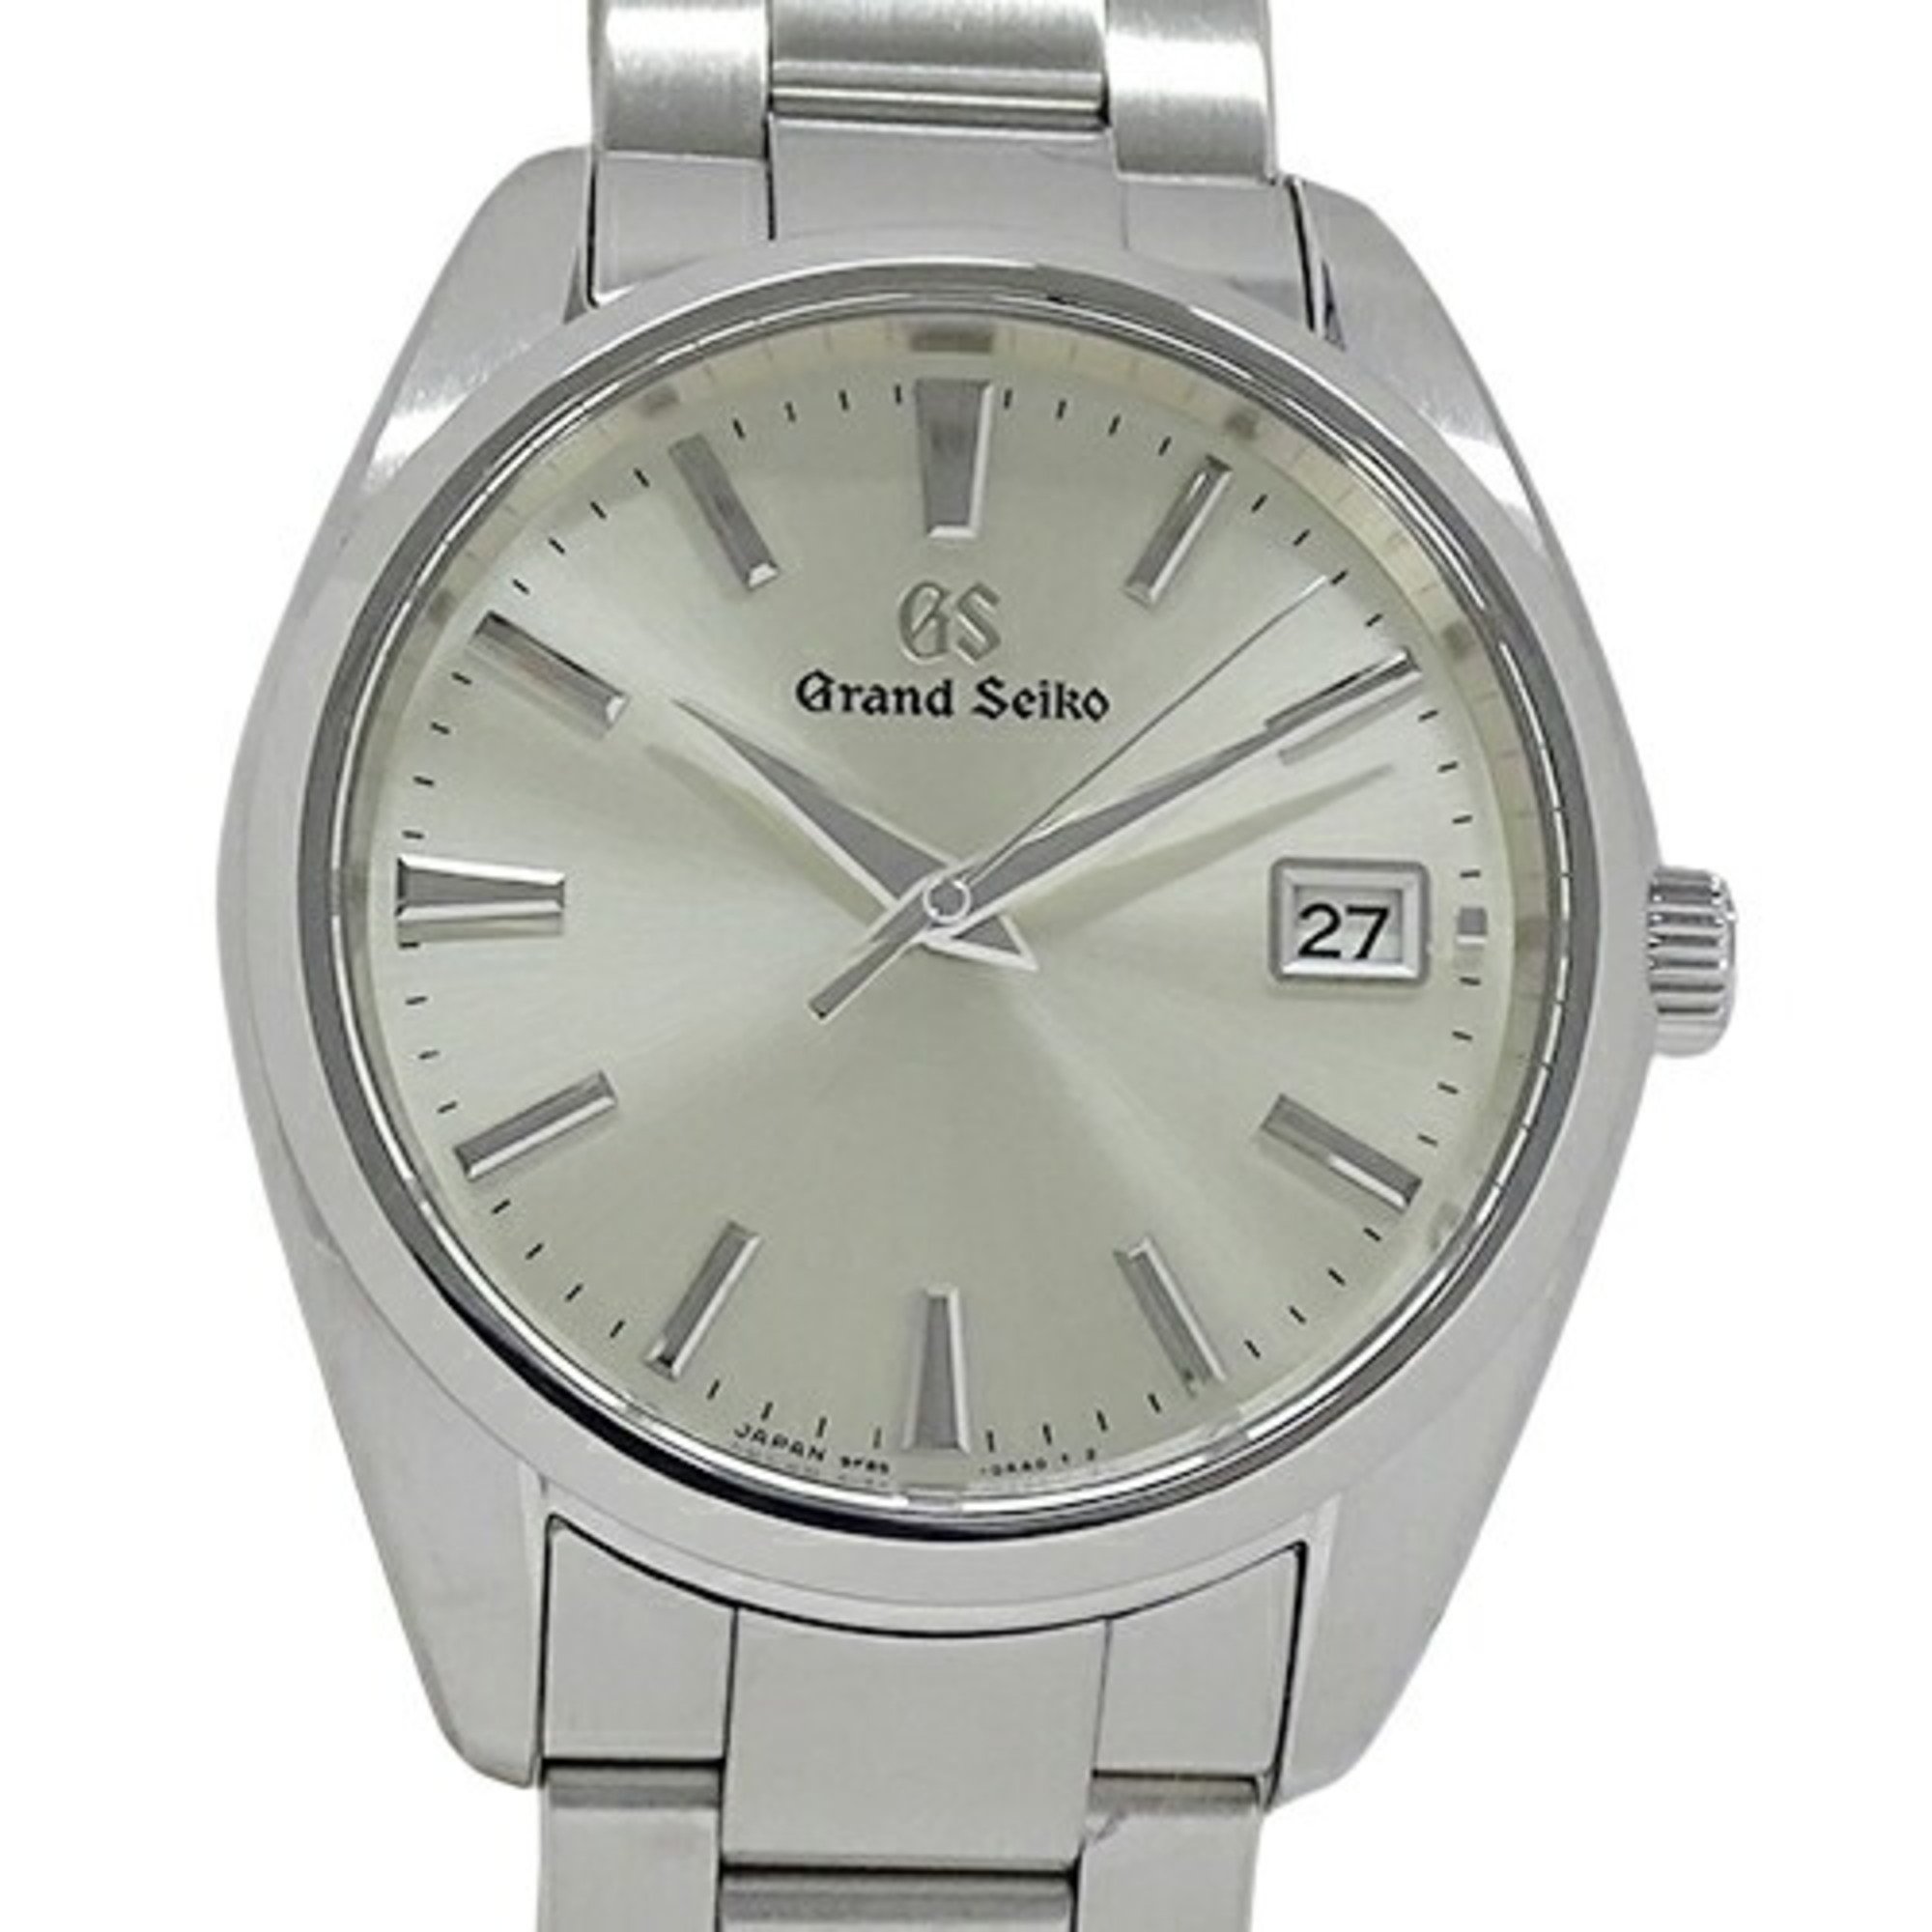 Grand Seiko GRAND SEIKO GS Heritage 9F65?0AC0 SBGP009 Watch Men's Date Quartz Stainless Steel SS Silver Polished